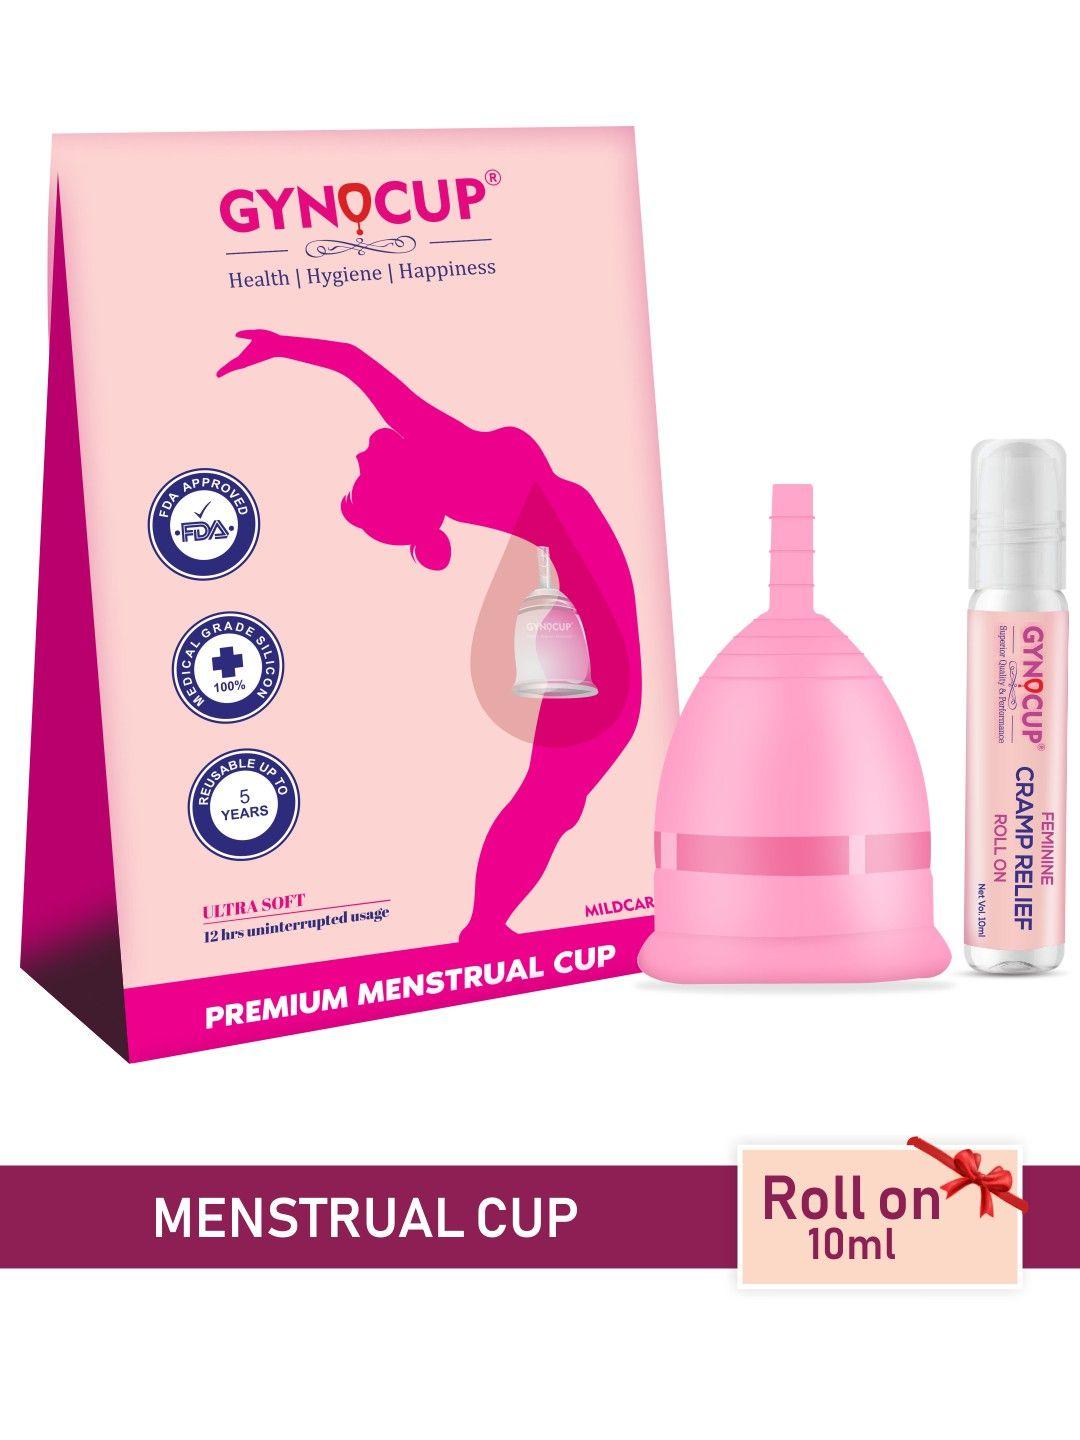 gynocup large size premium reusable menstrual cup with period cramp relief-10ml